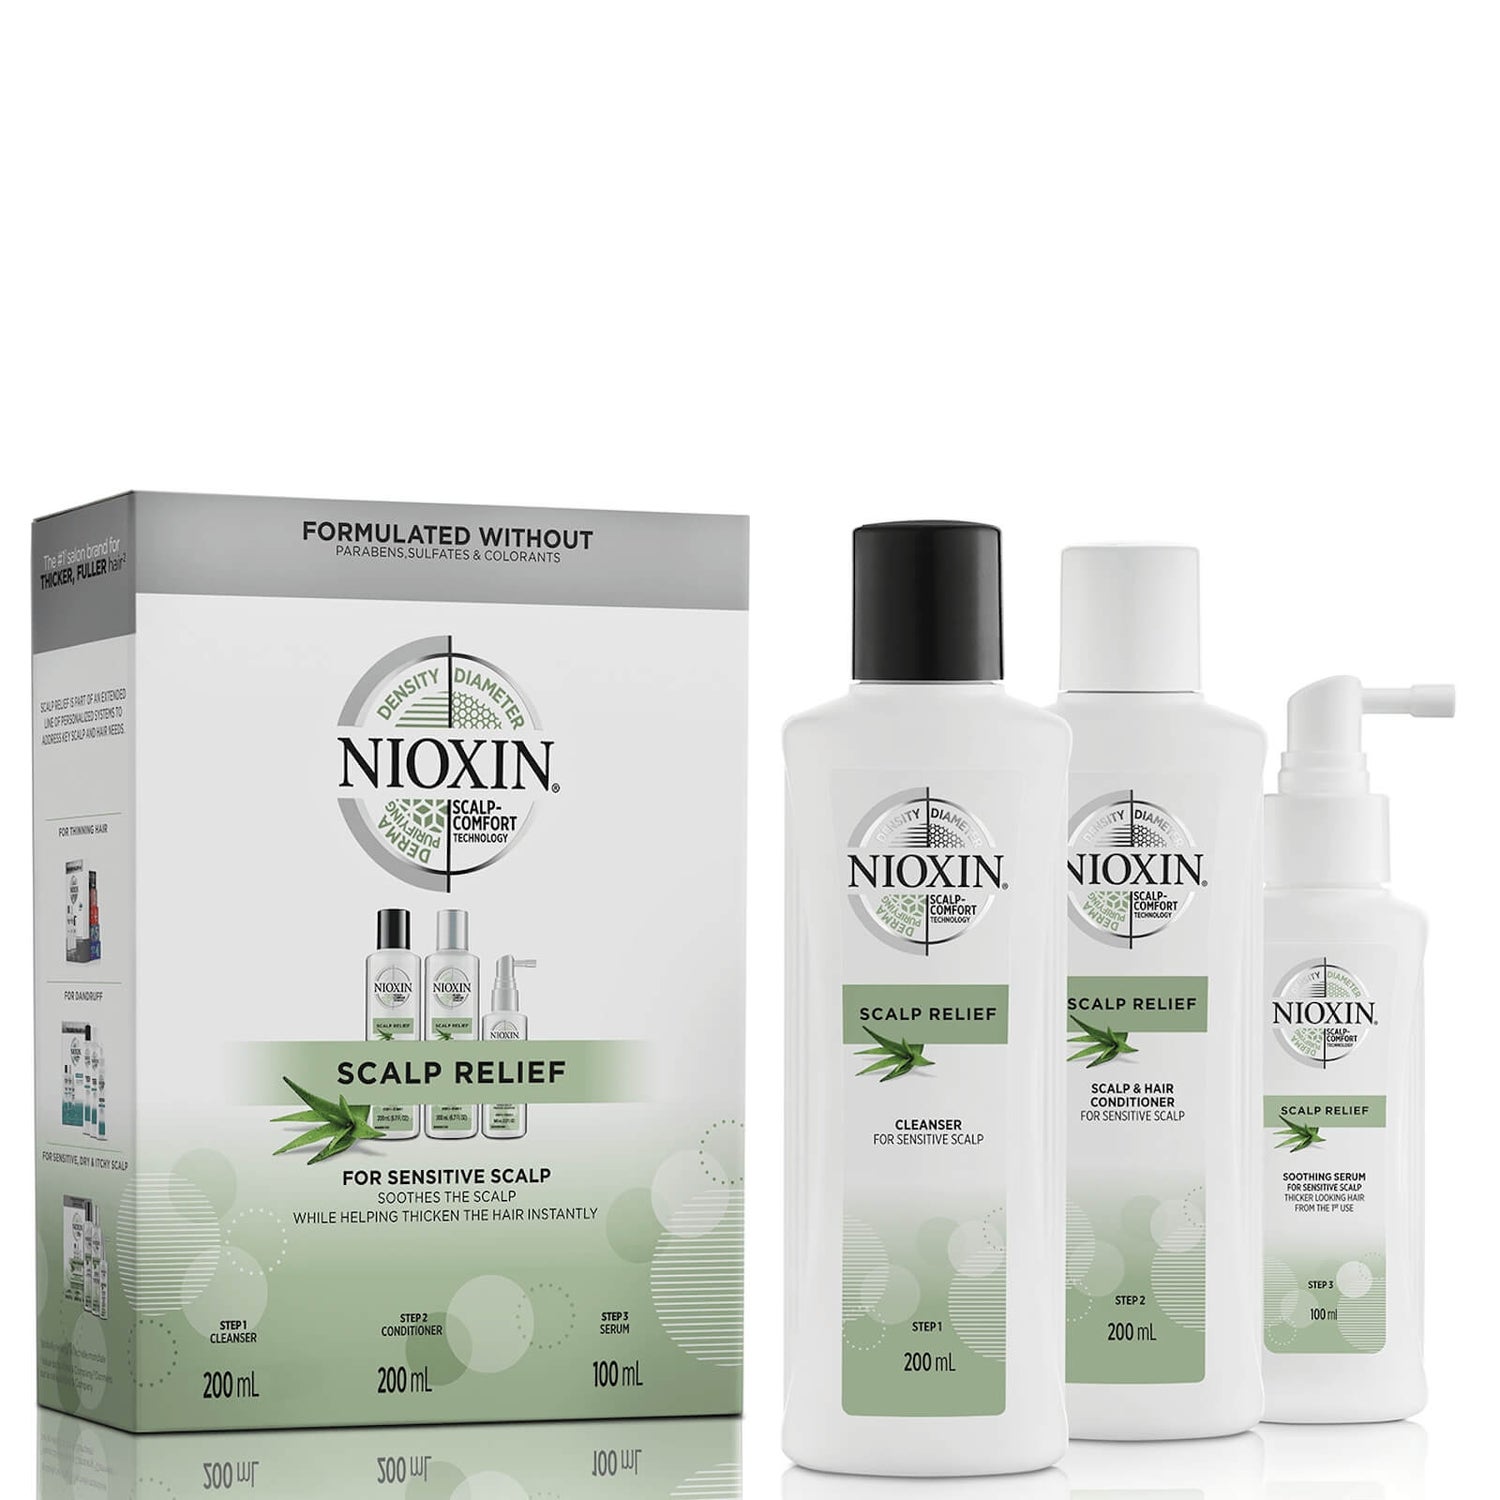 Nioxin Scalp Relief Kit for Sensitive, Dry and Itchy Scalp